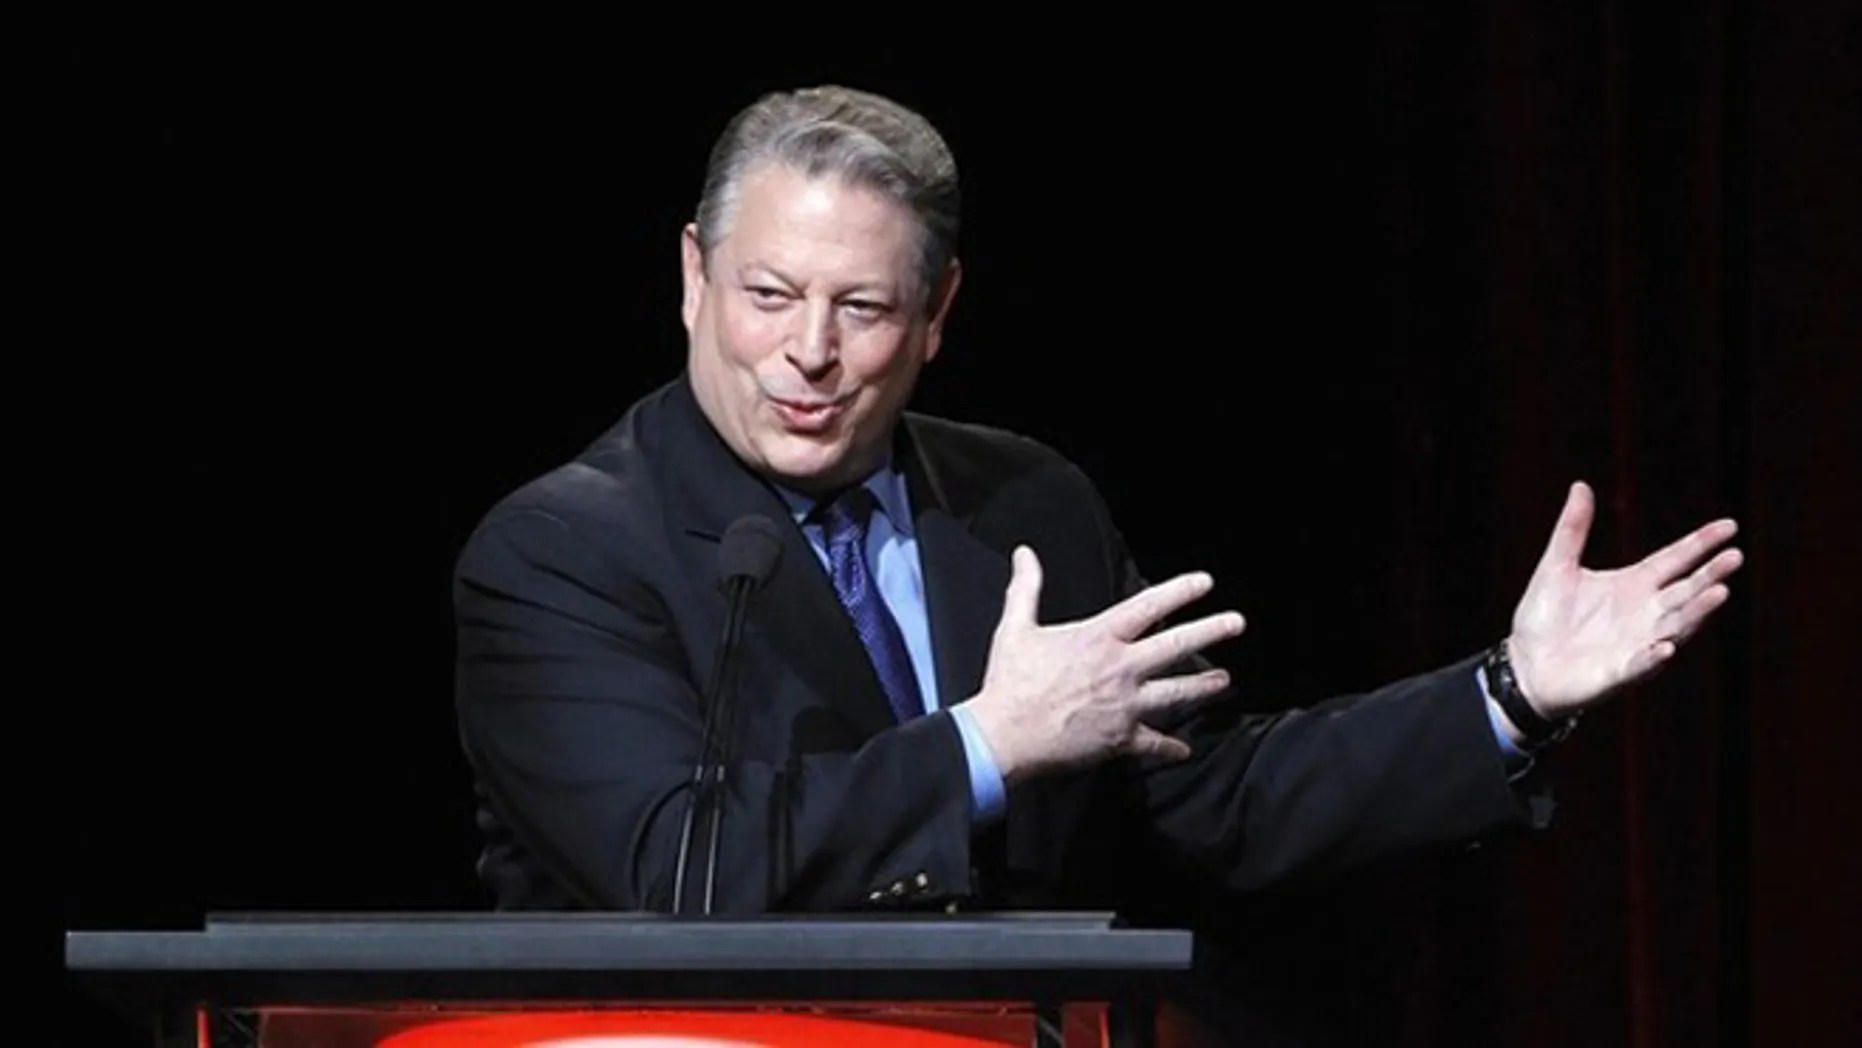 Al Gore inducted into Hall of Fame Fox News